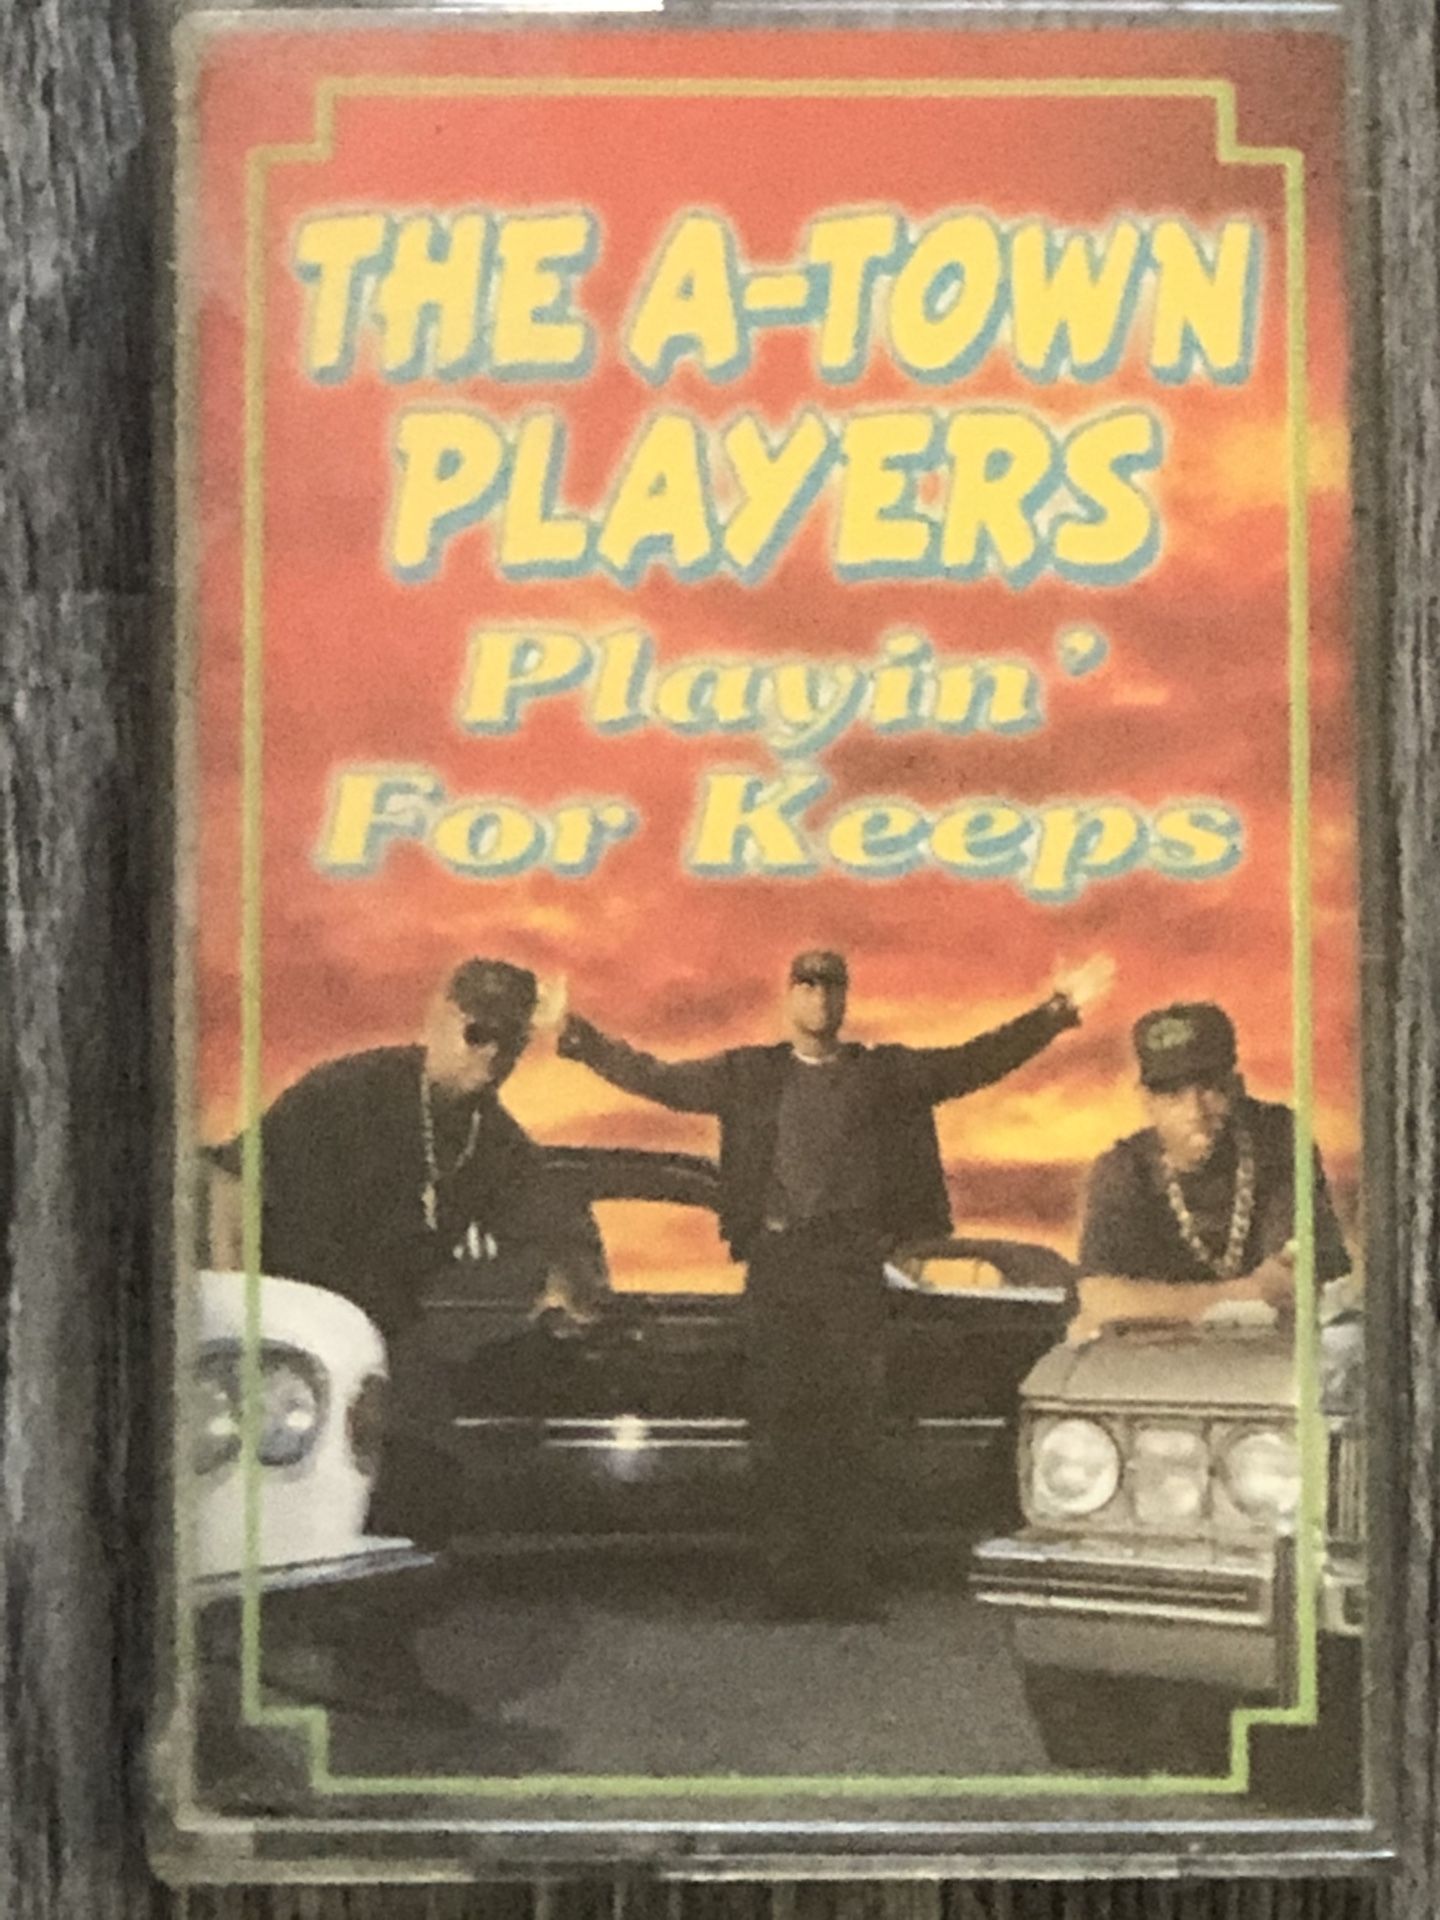 A-Town Players Playin’ For Keeps Cassette